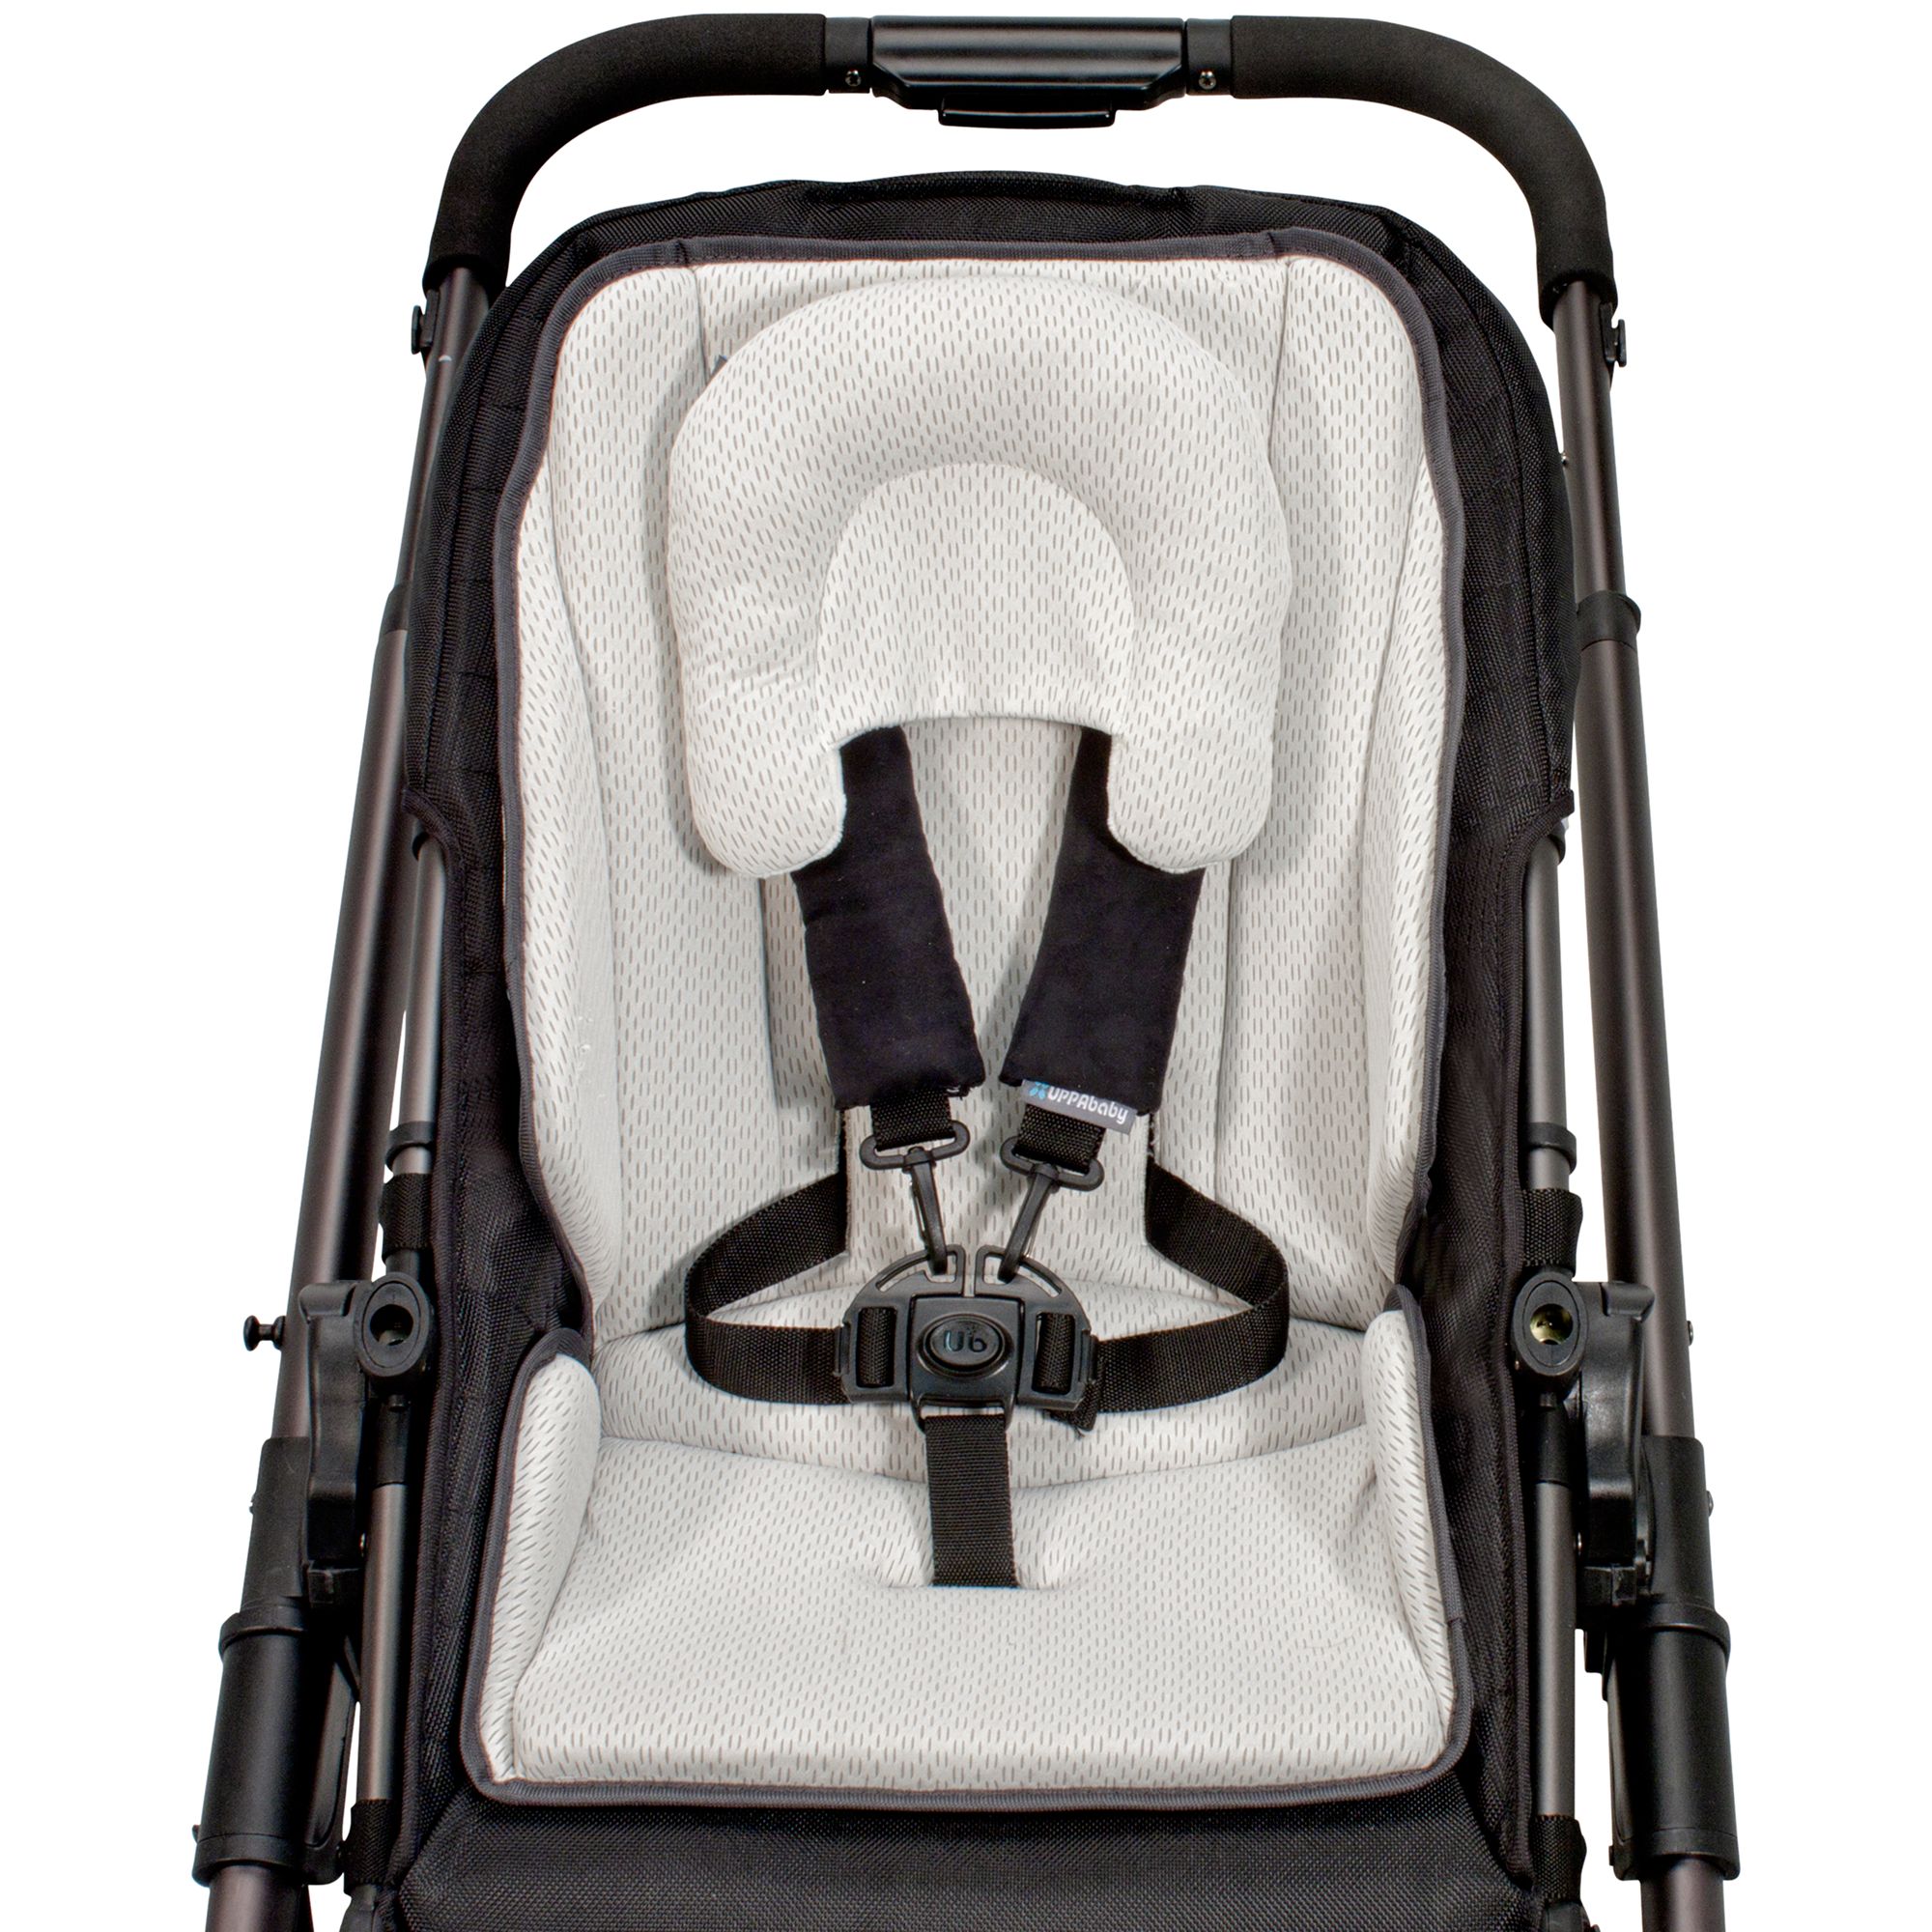 uppababy stroller seat liner